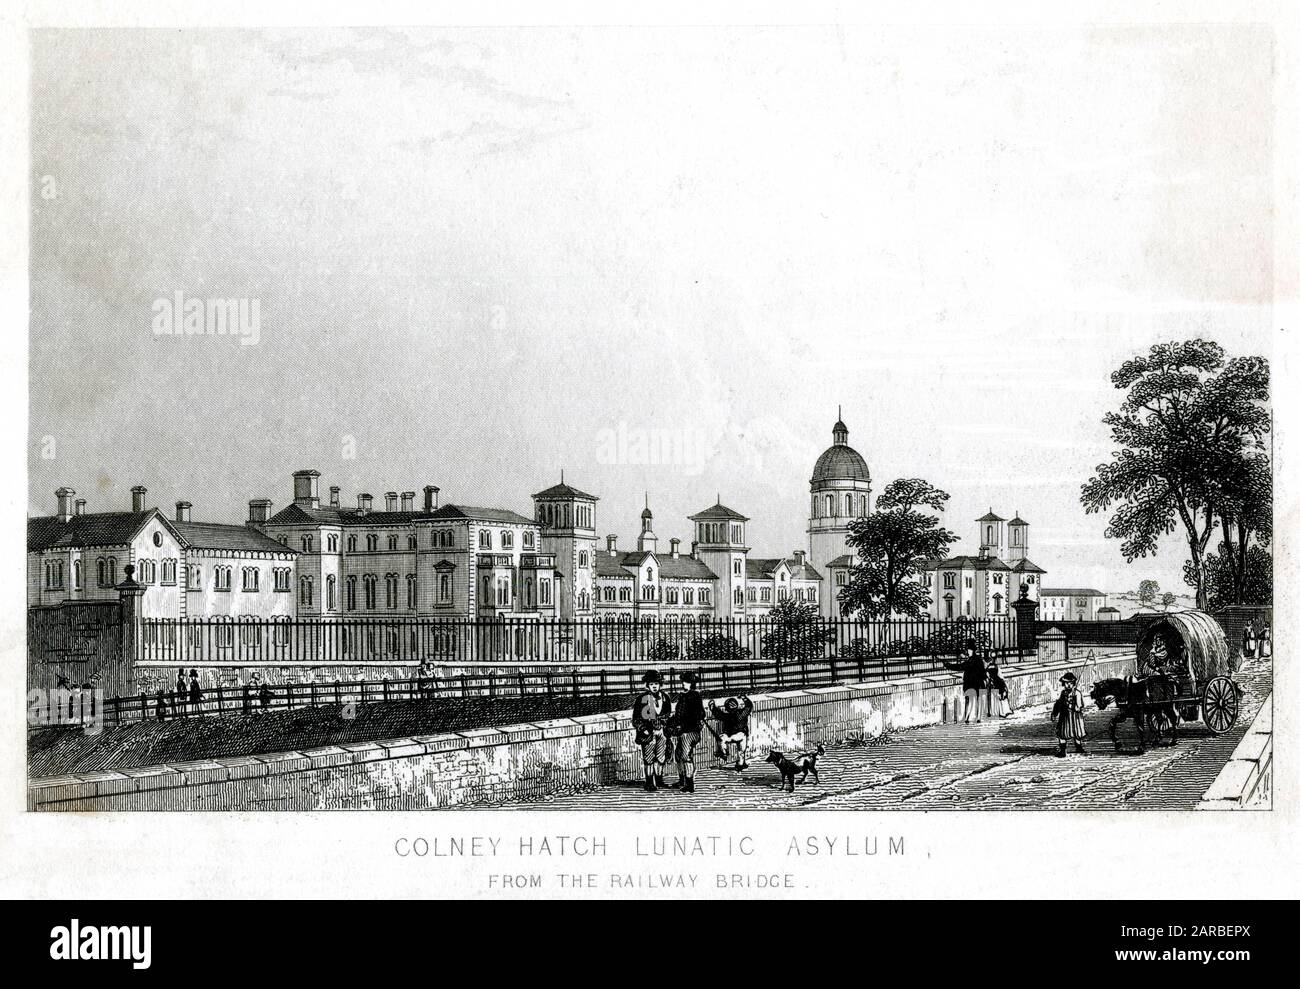 Middlesex Pauper Lunatic Asylum at Colney Hatch, near Friern Barnet, Middlesex (North London), seen from the railway bridge. The foundation stone was laid in 1849 by Prince Albert. The asylum later became known as Colney Hatch Mental Hospital and then as Friern Hospital. Stock Photo